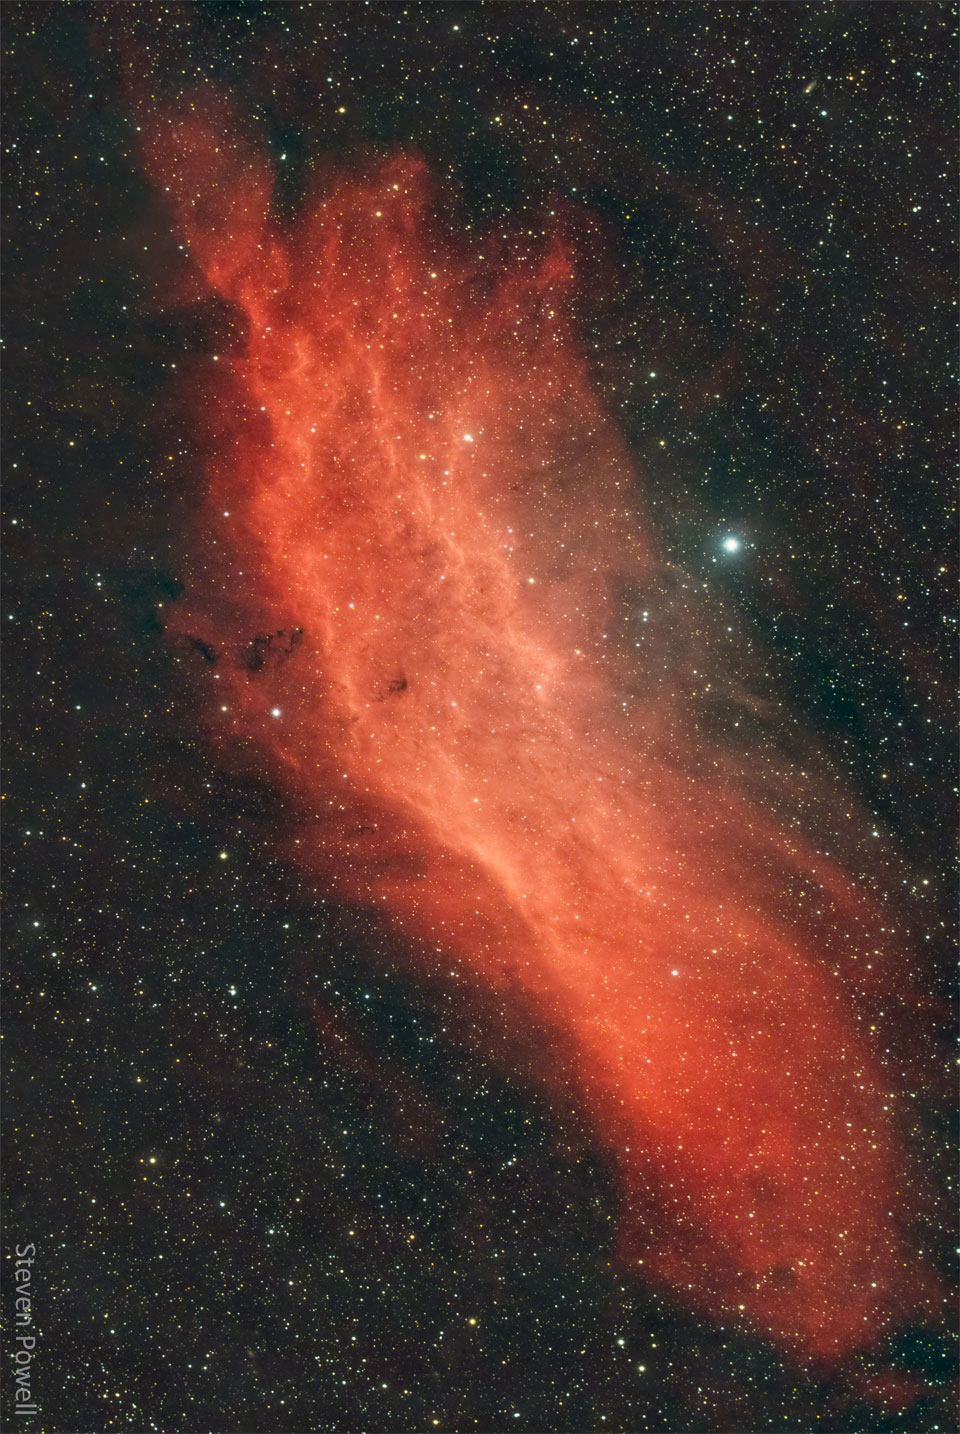 A red gaseous nebula is shown in front of a dark starfield.
The shape of the nebula resembles the US state of California.
Please see the explanation for more detailed information.